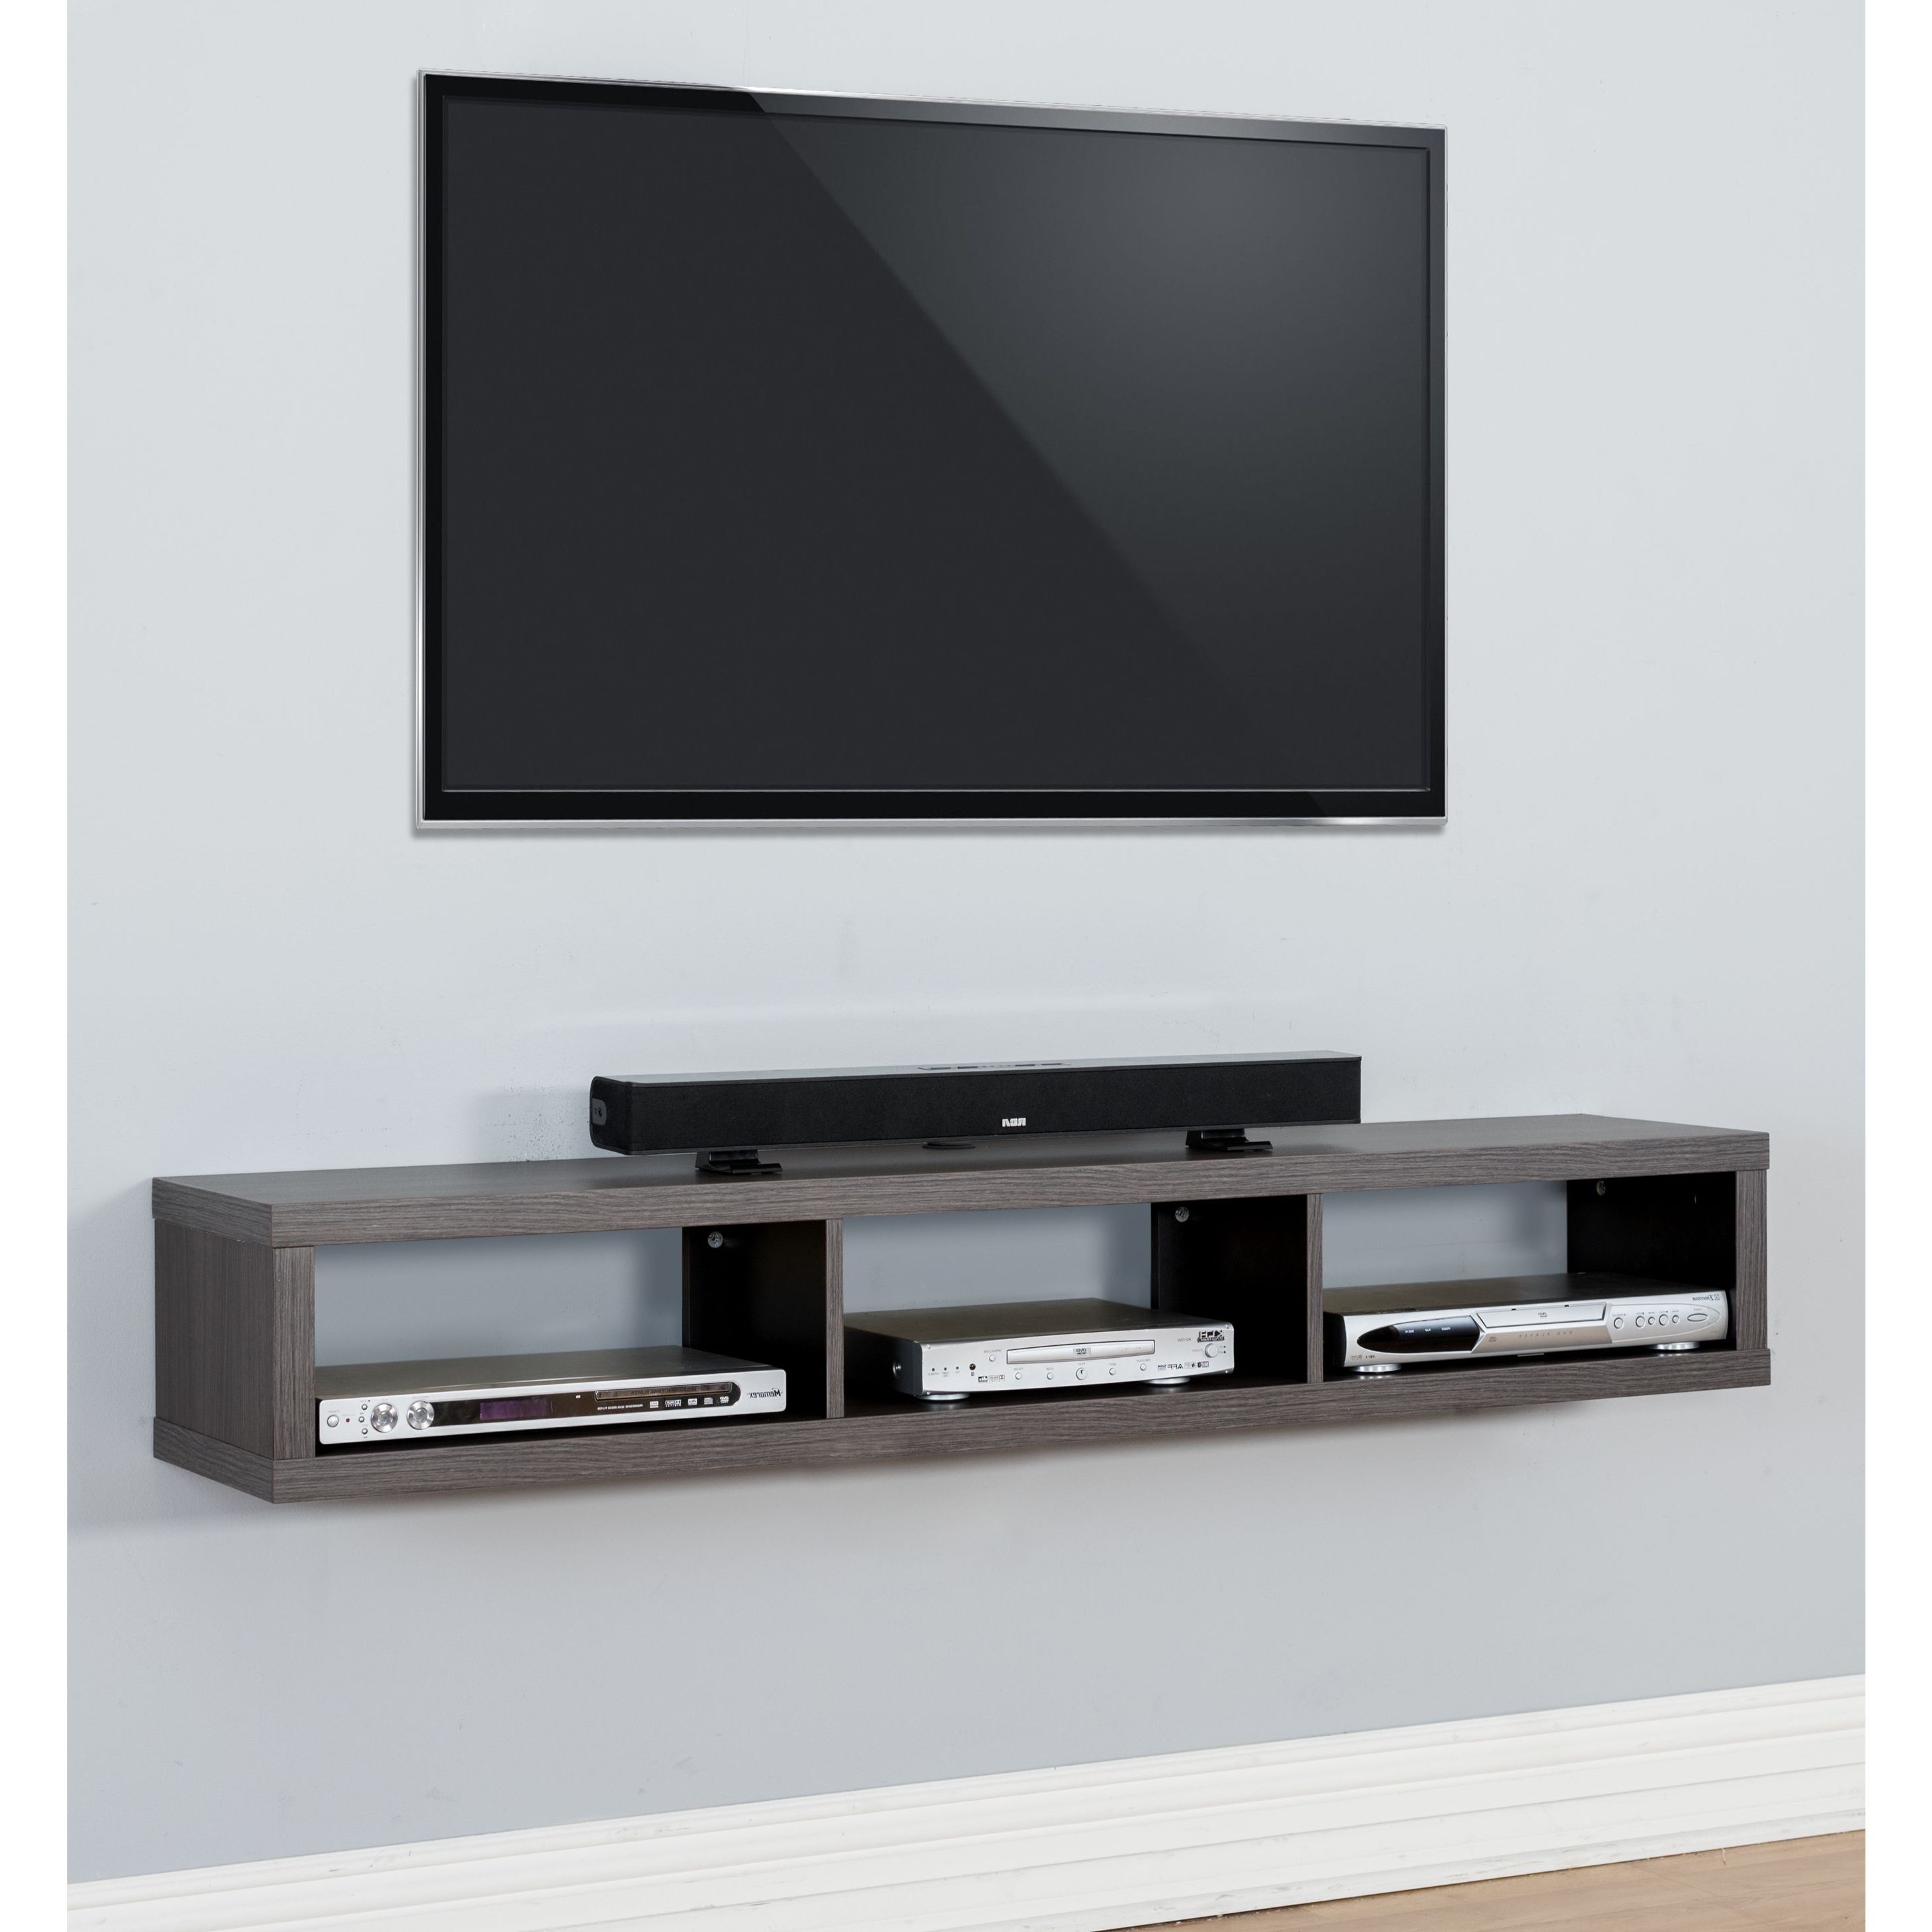 Very Cheap Tv Units Throughout Favorite The Functional And Upscale Appearance Of This Wall Mounted Tv (View 20 of 20)